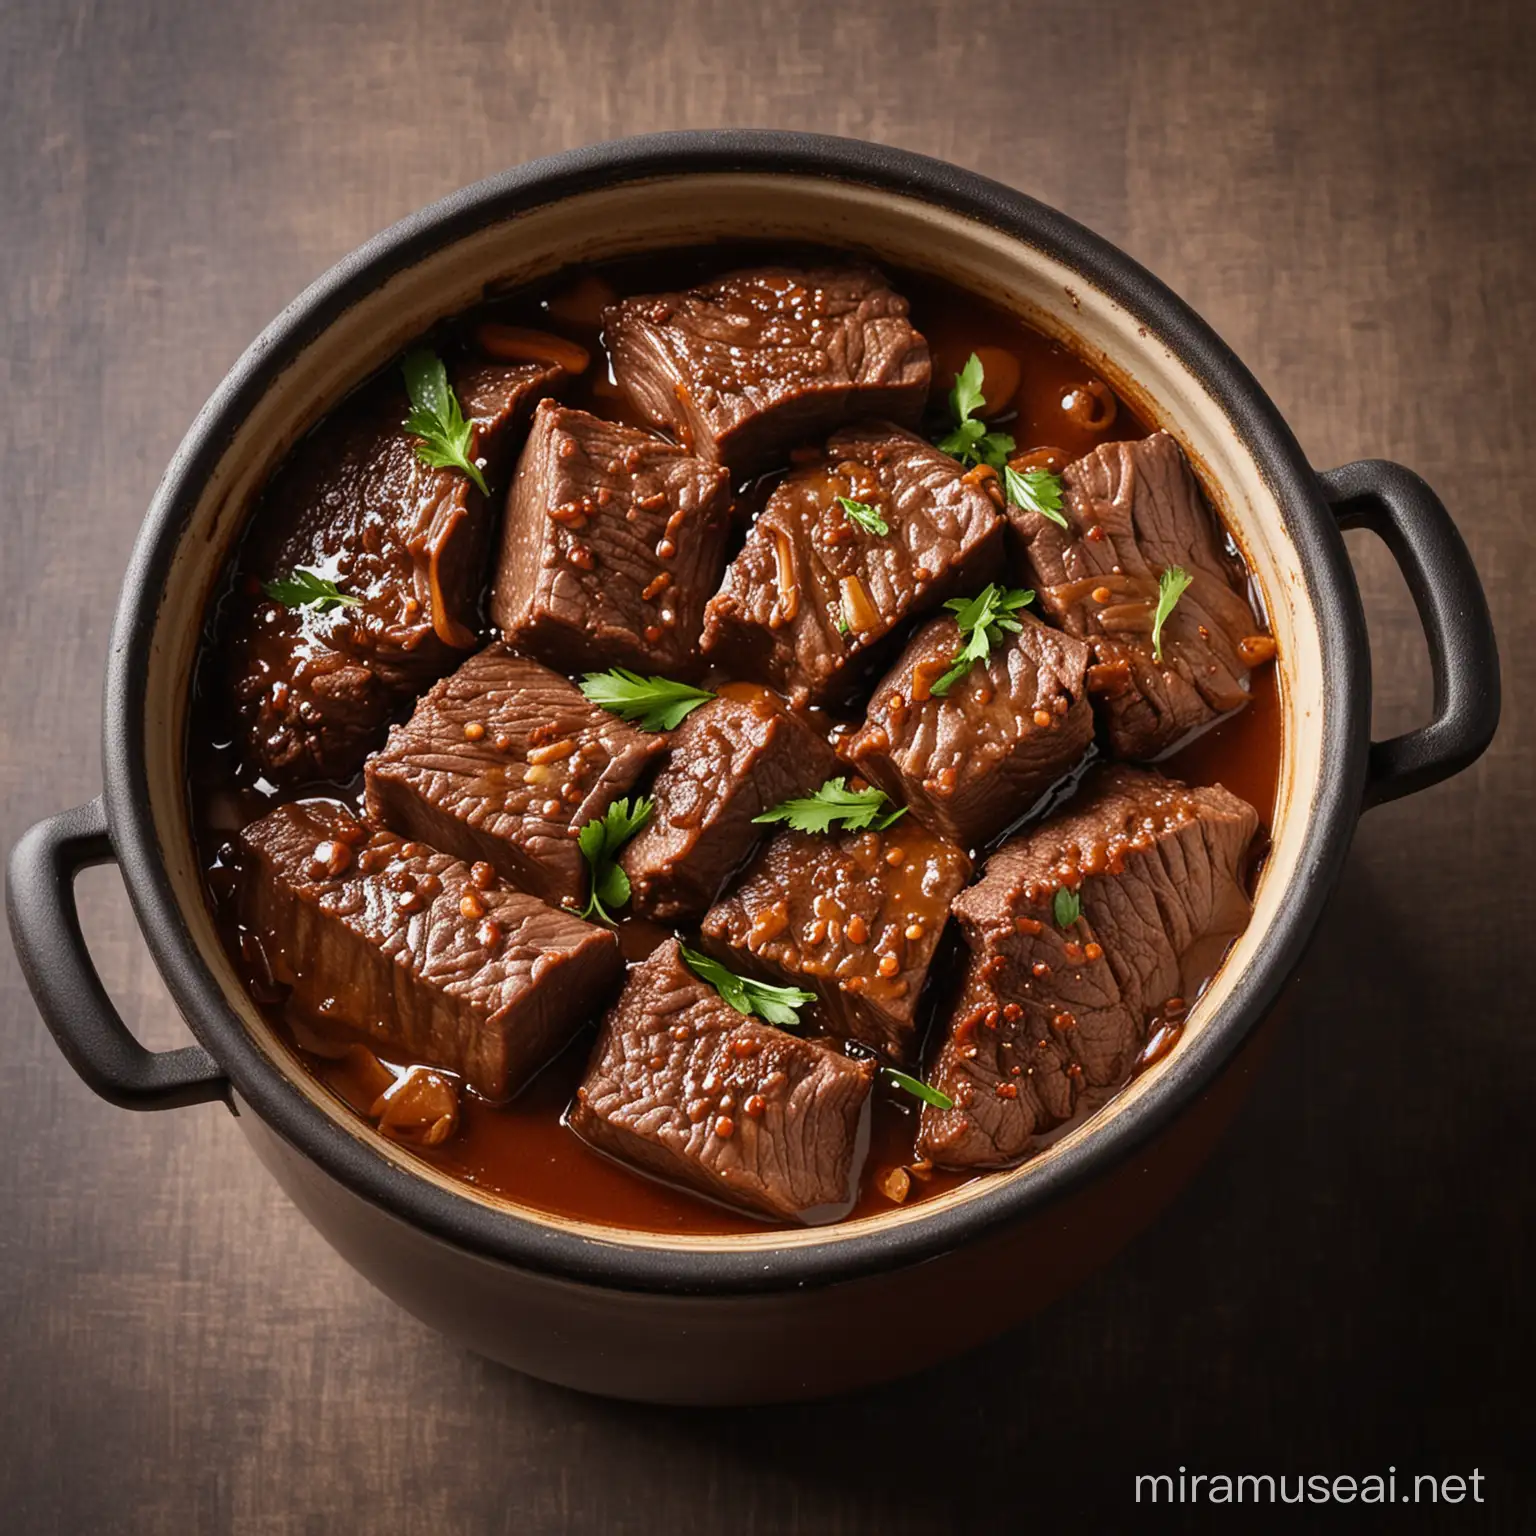 Indonesian Beef Semur Recipe Traditional Food Photography in a Pot